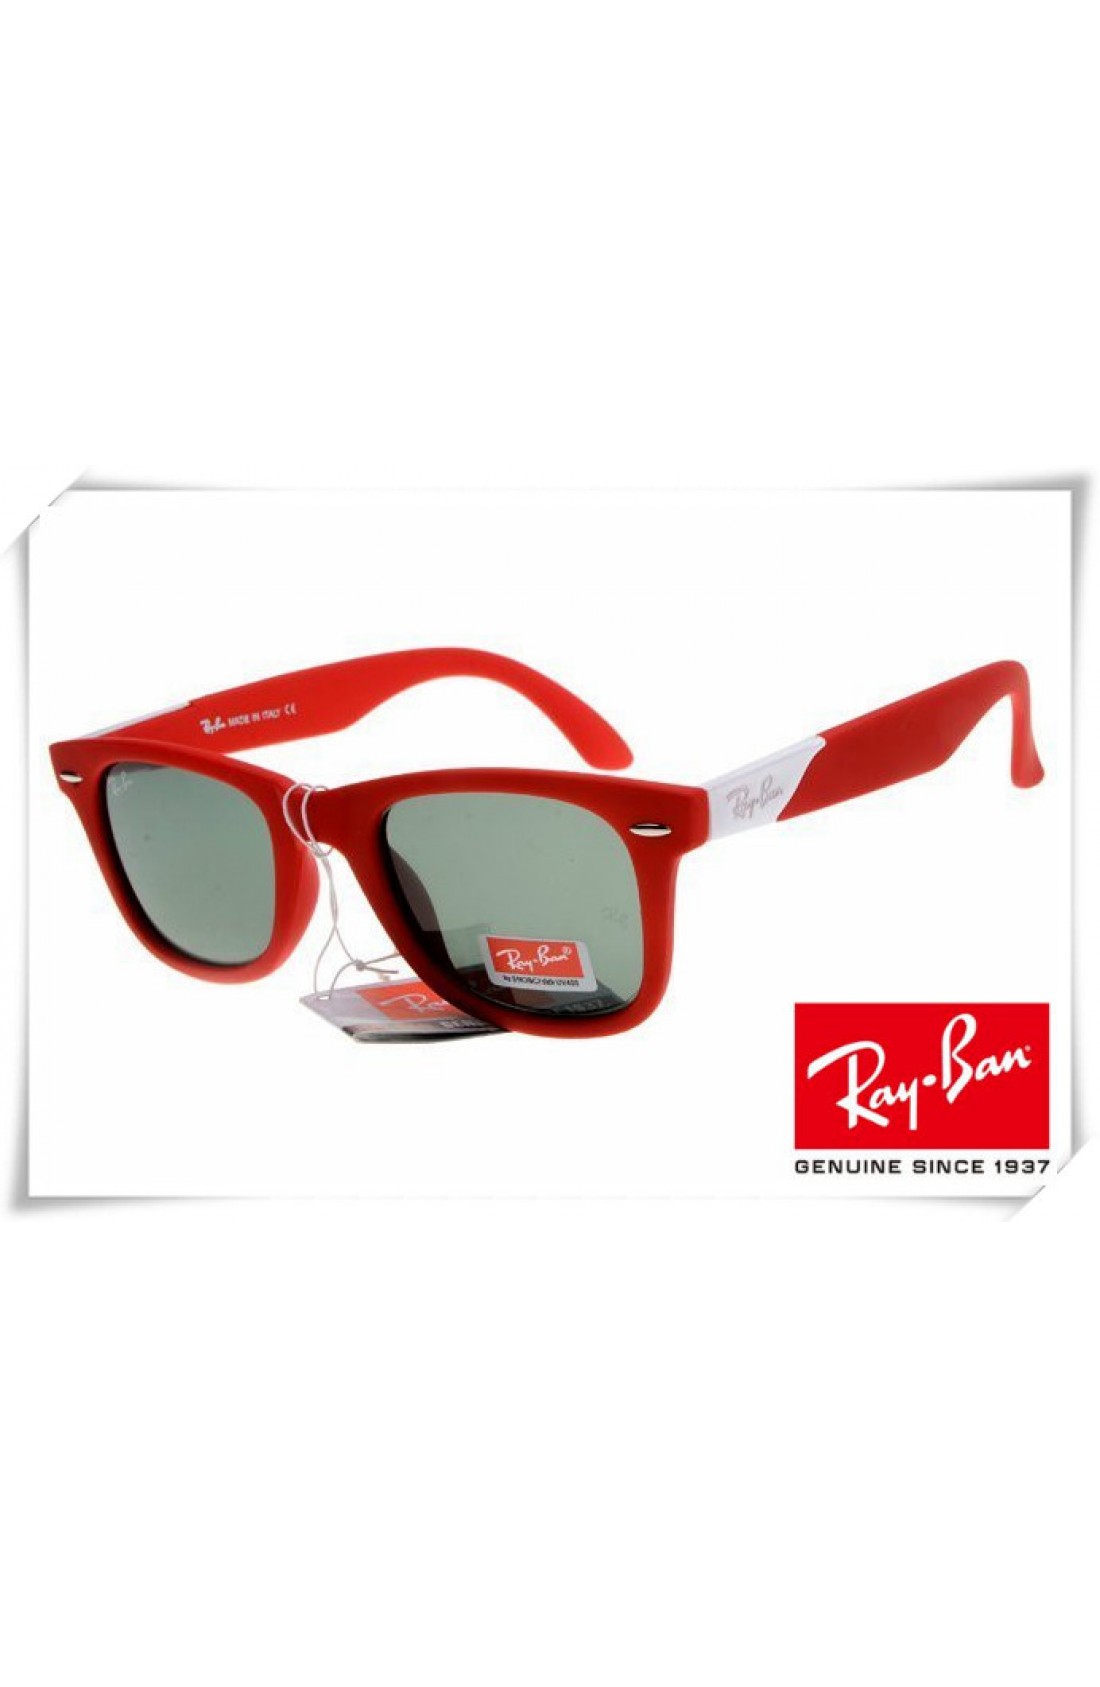 ray ban sunglasses red frame